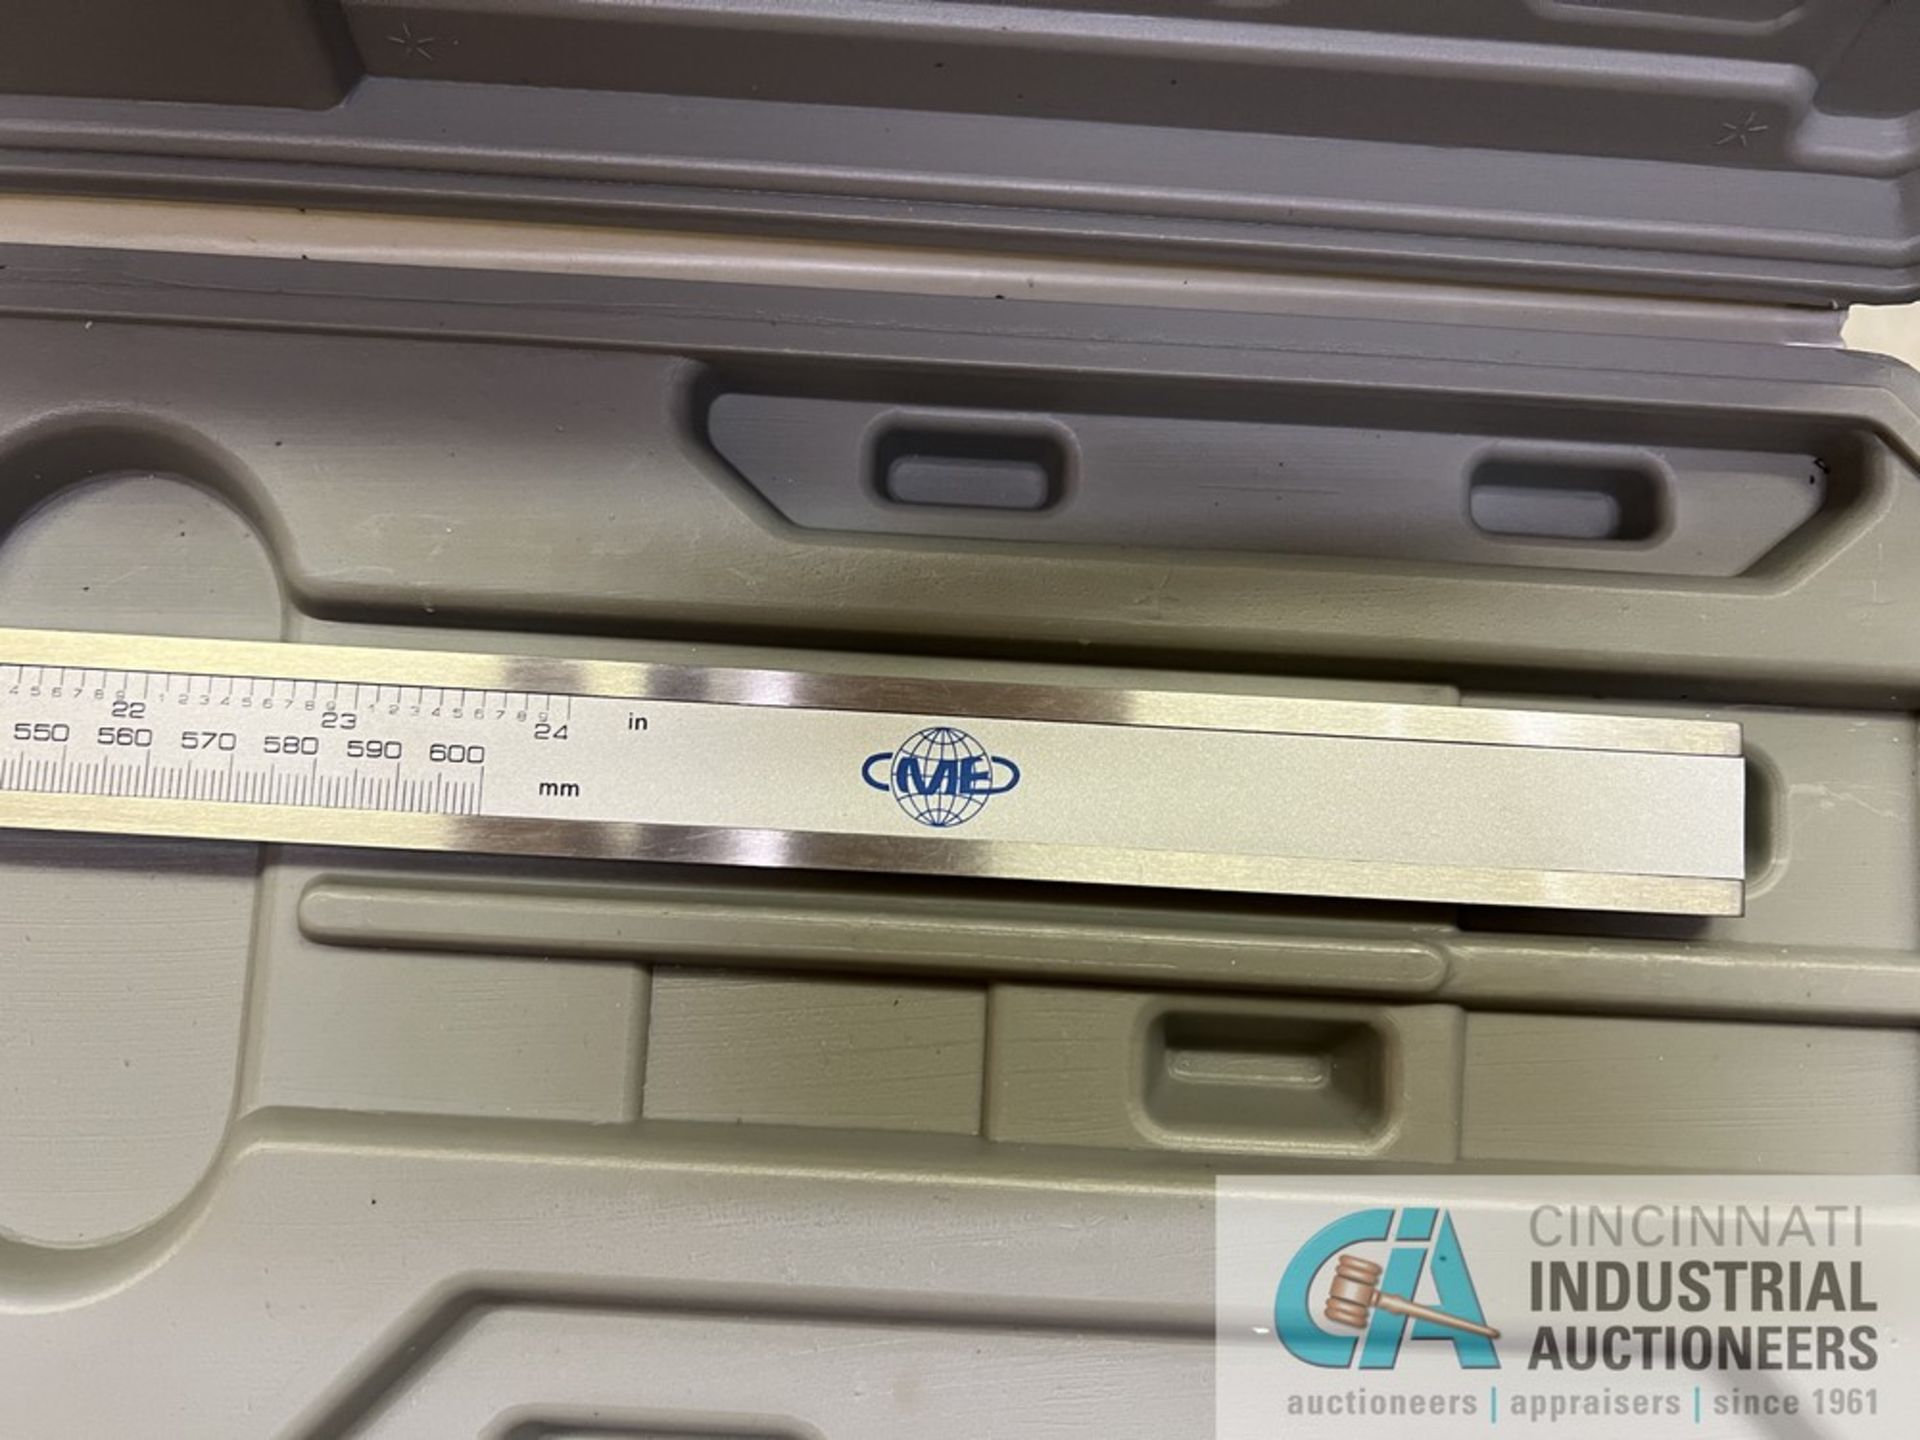 24" MF DIGITAL CALIPER **LOCATED AT 9150 PROSPECT STREET, INDIANAPOLIS, IN 46239 - REMOVAL BY - Image 2 of 3